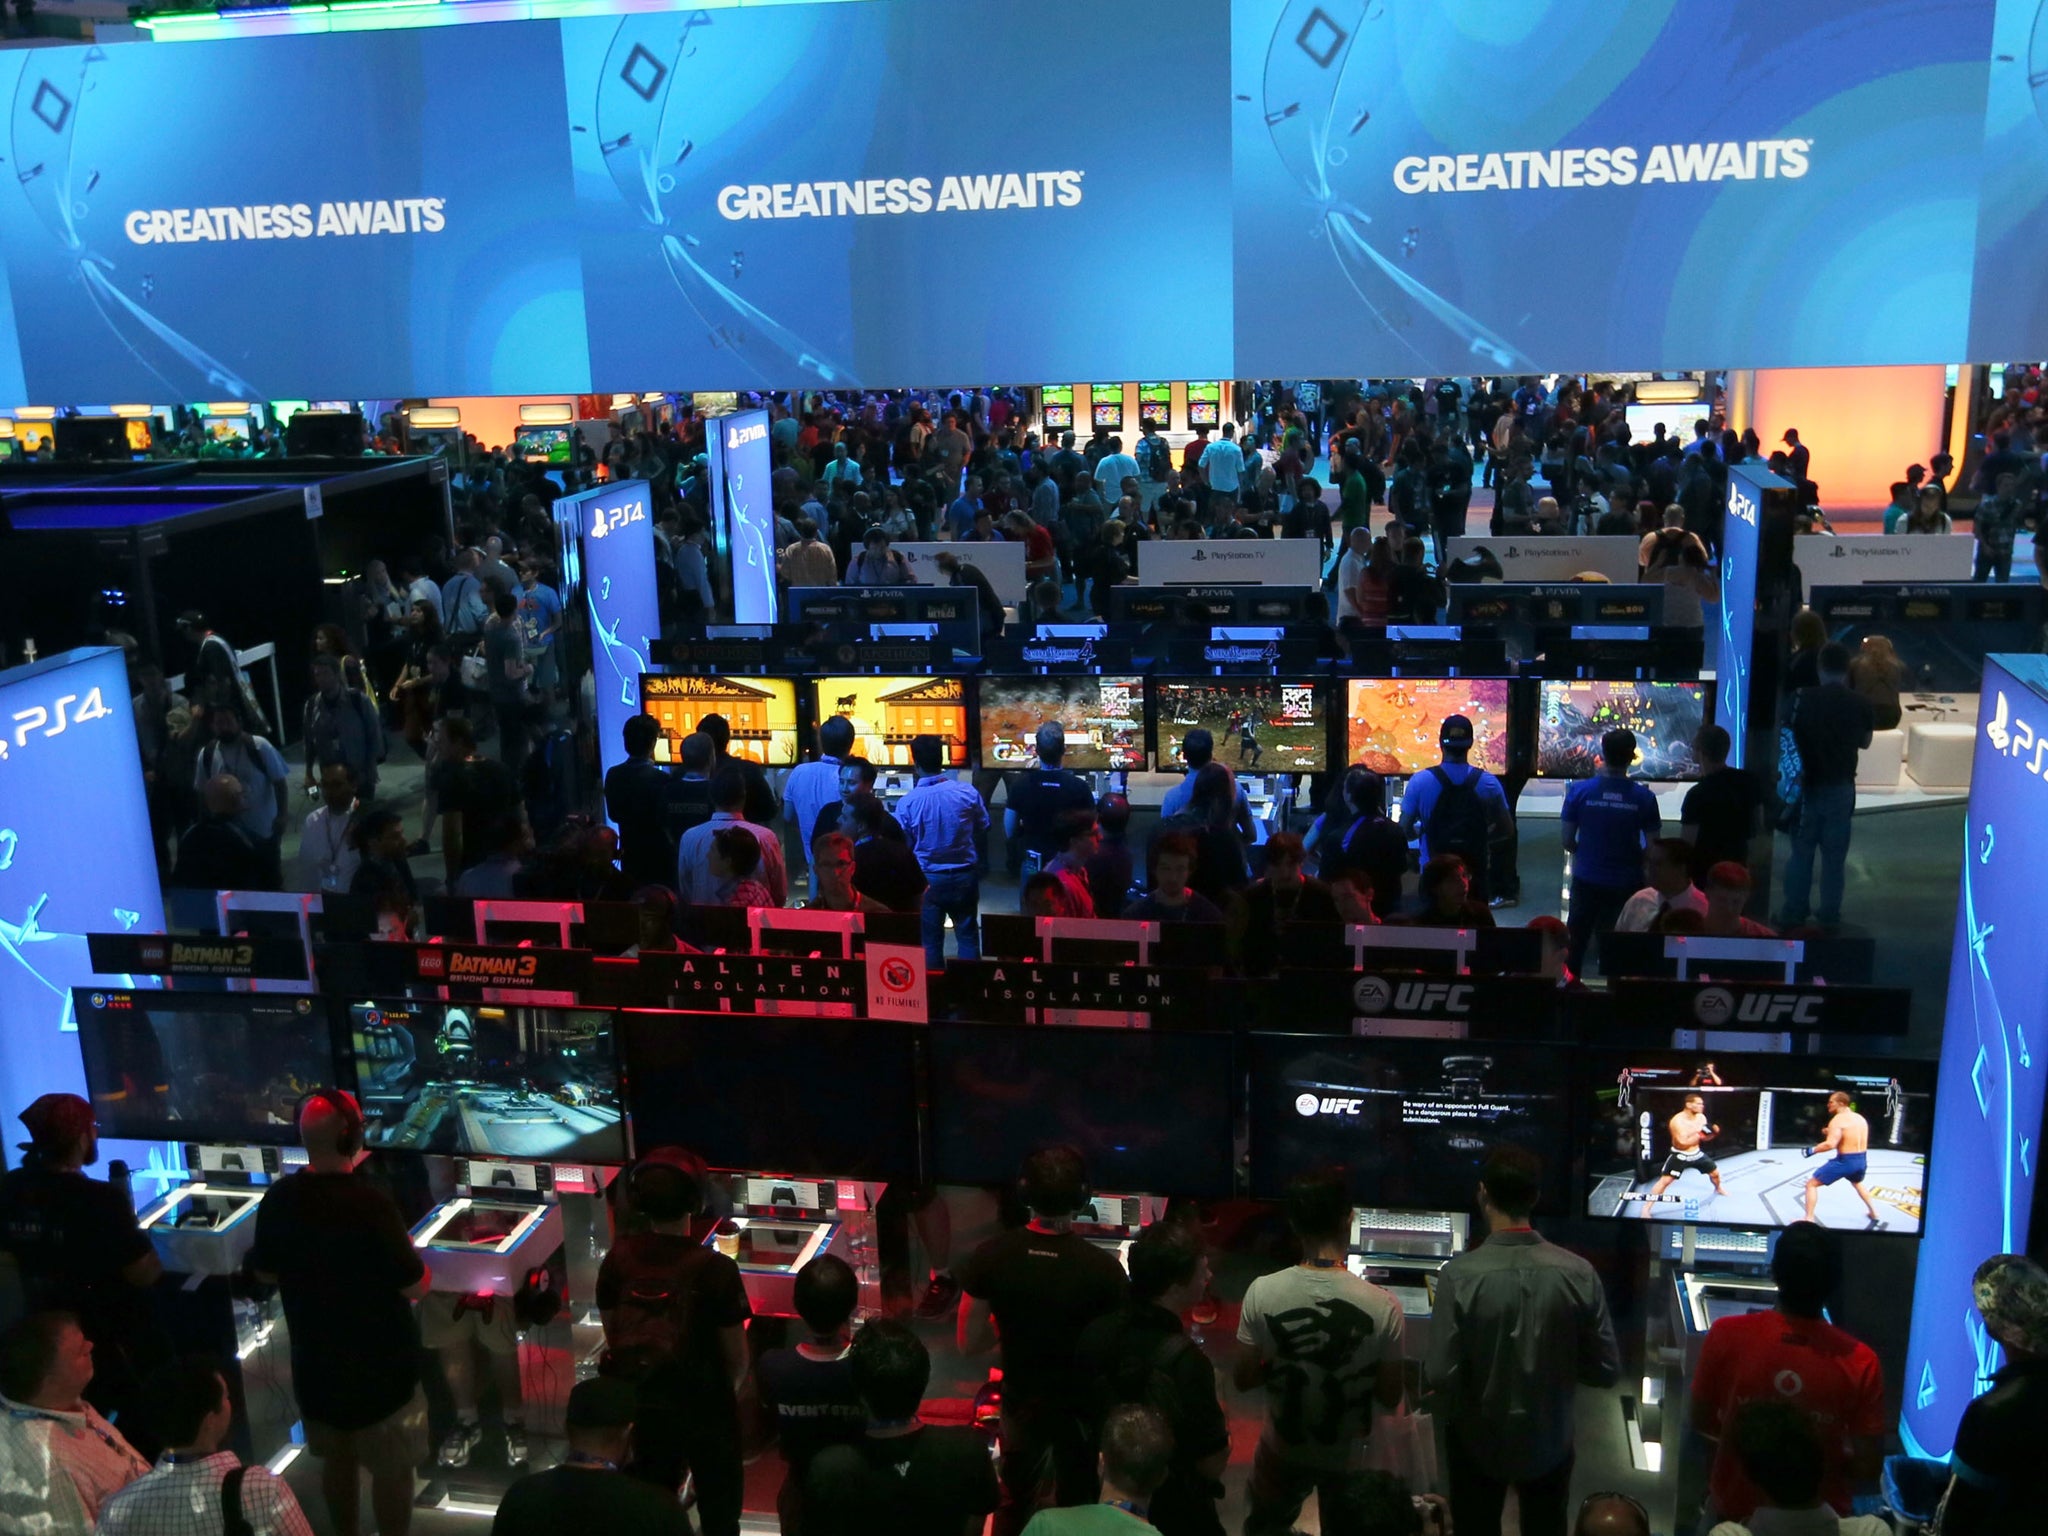 Gamers file in to play new releases on a huge array of screens and consoles at E3